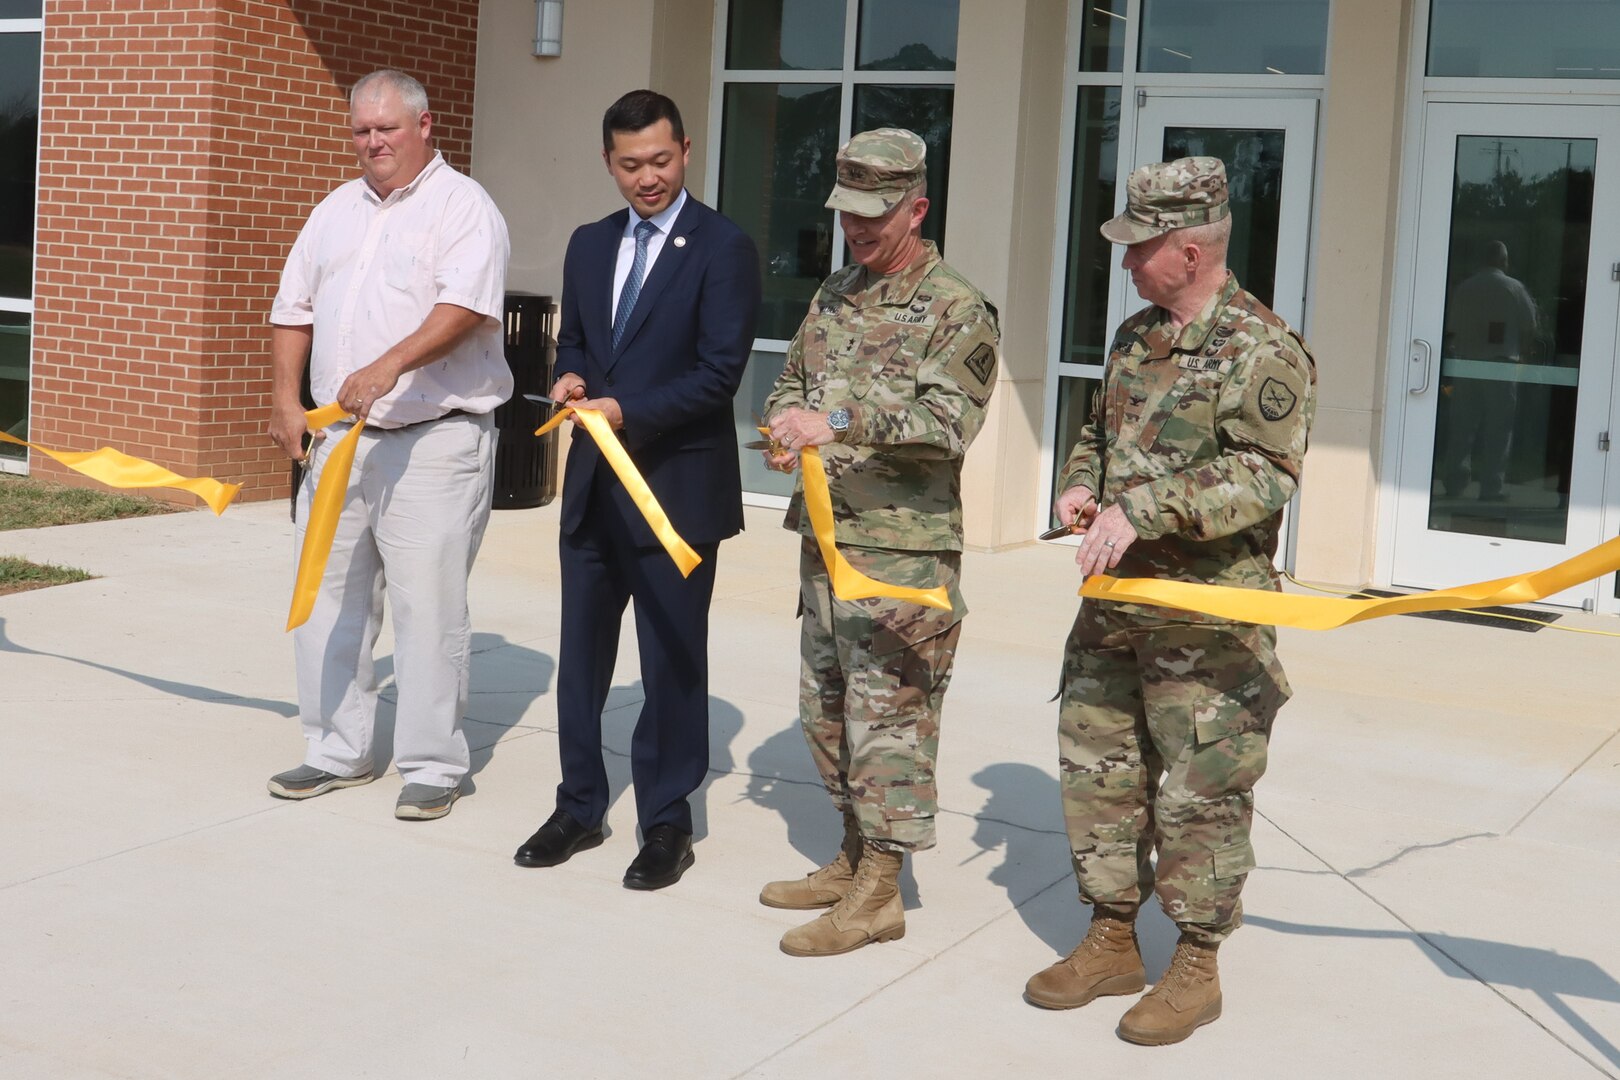 Ceremony officially opens new headquarters for 91st Cyber Brigade